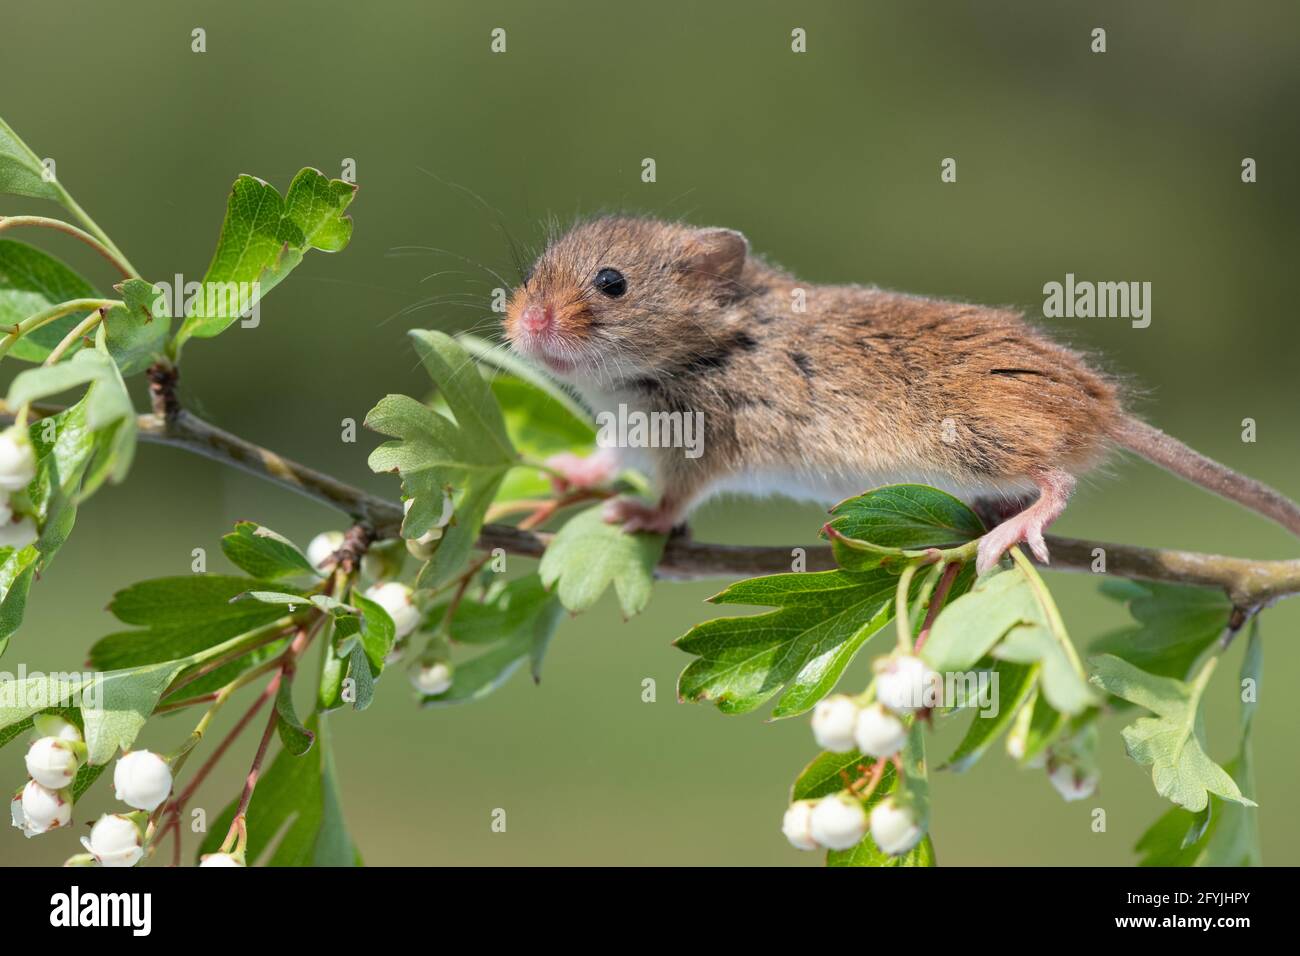 Harvest mouse running along a branch of a flowering plant Stock Photo